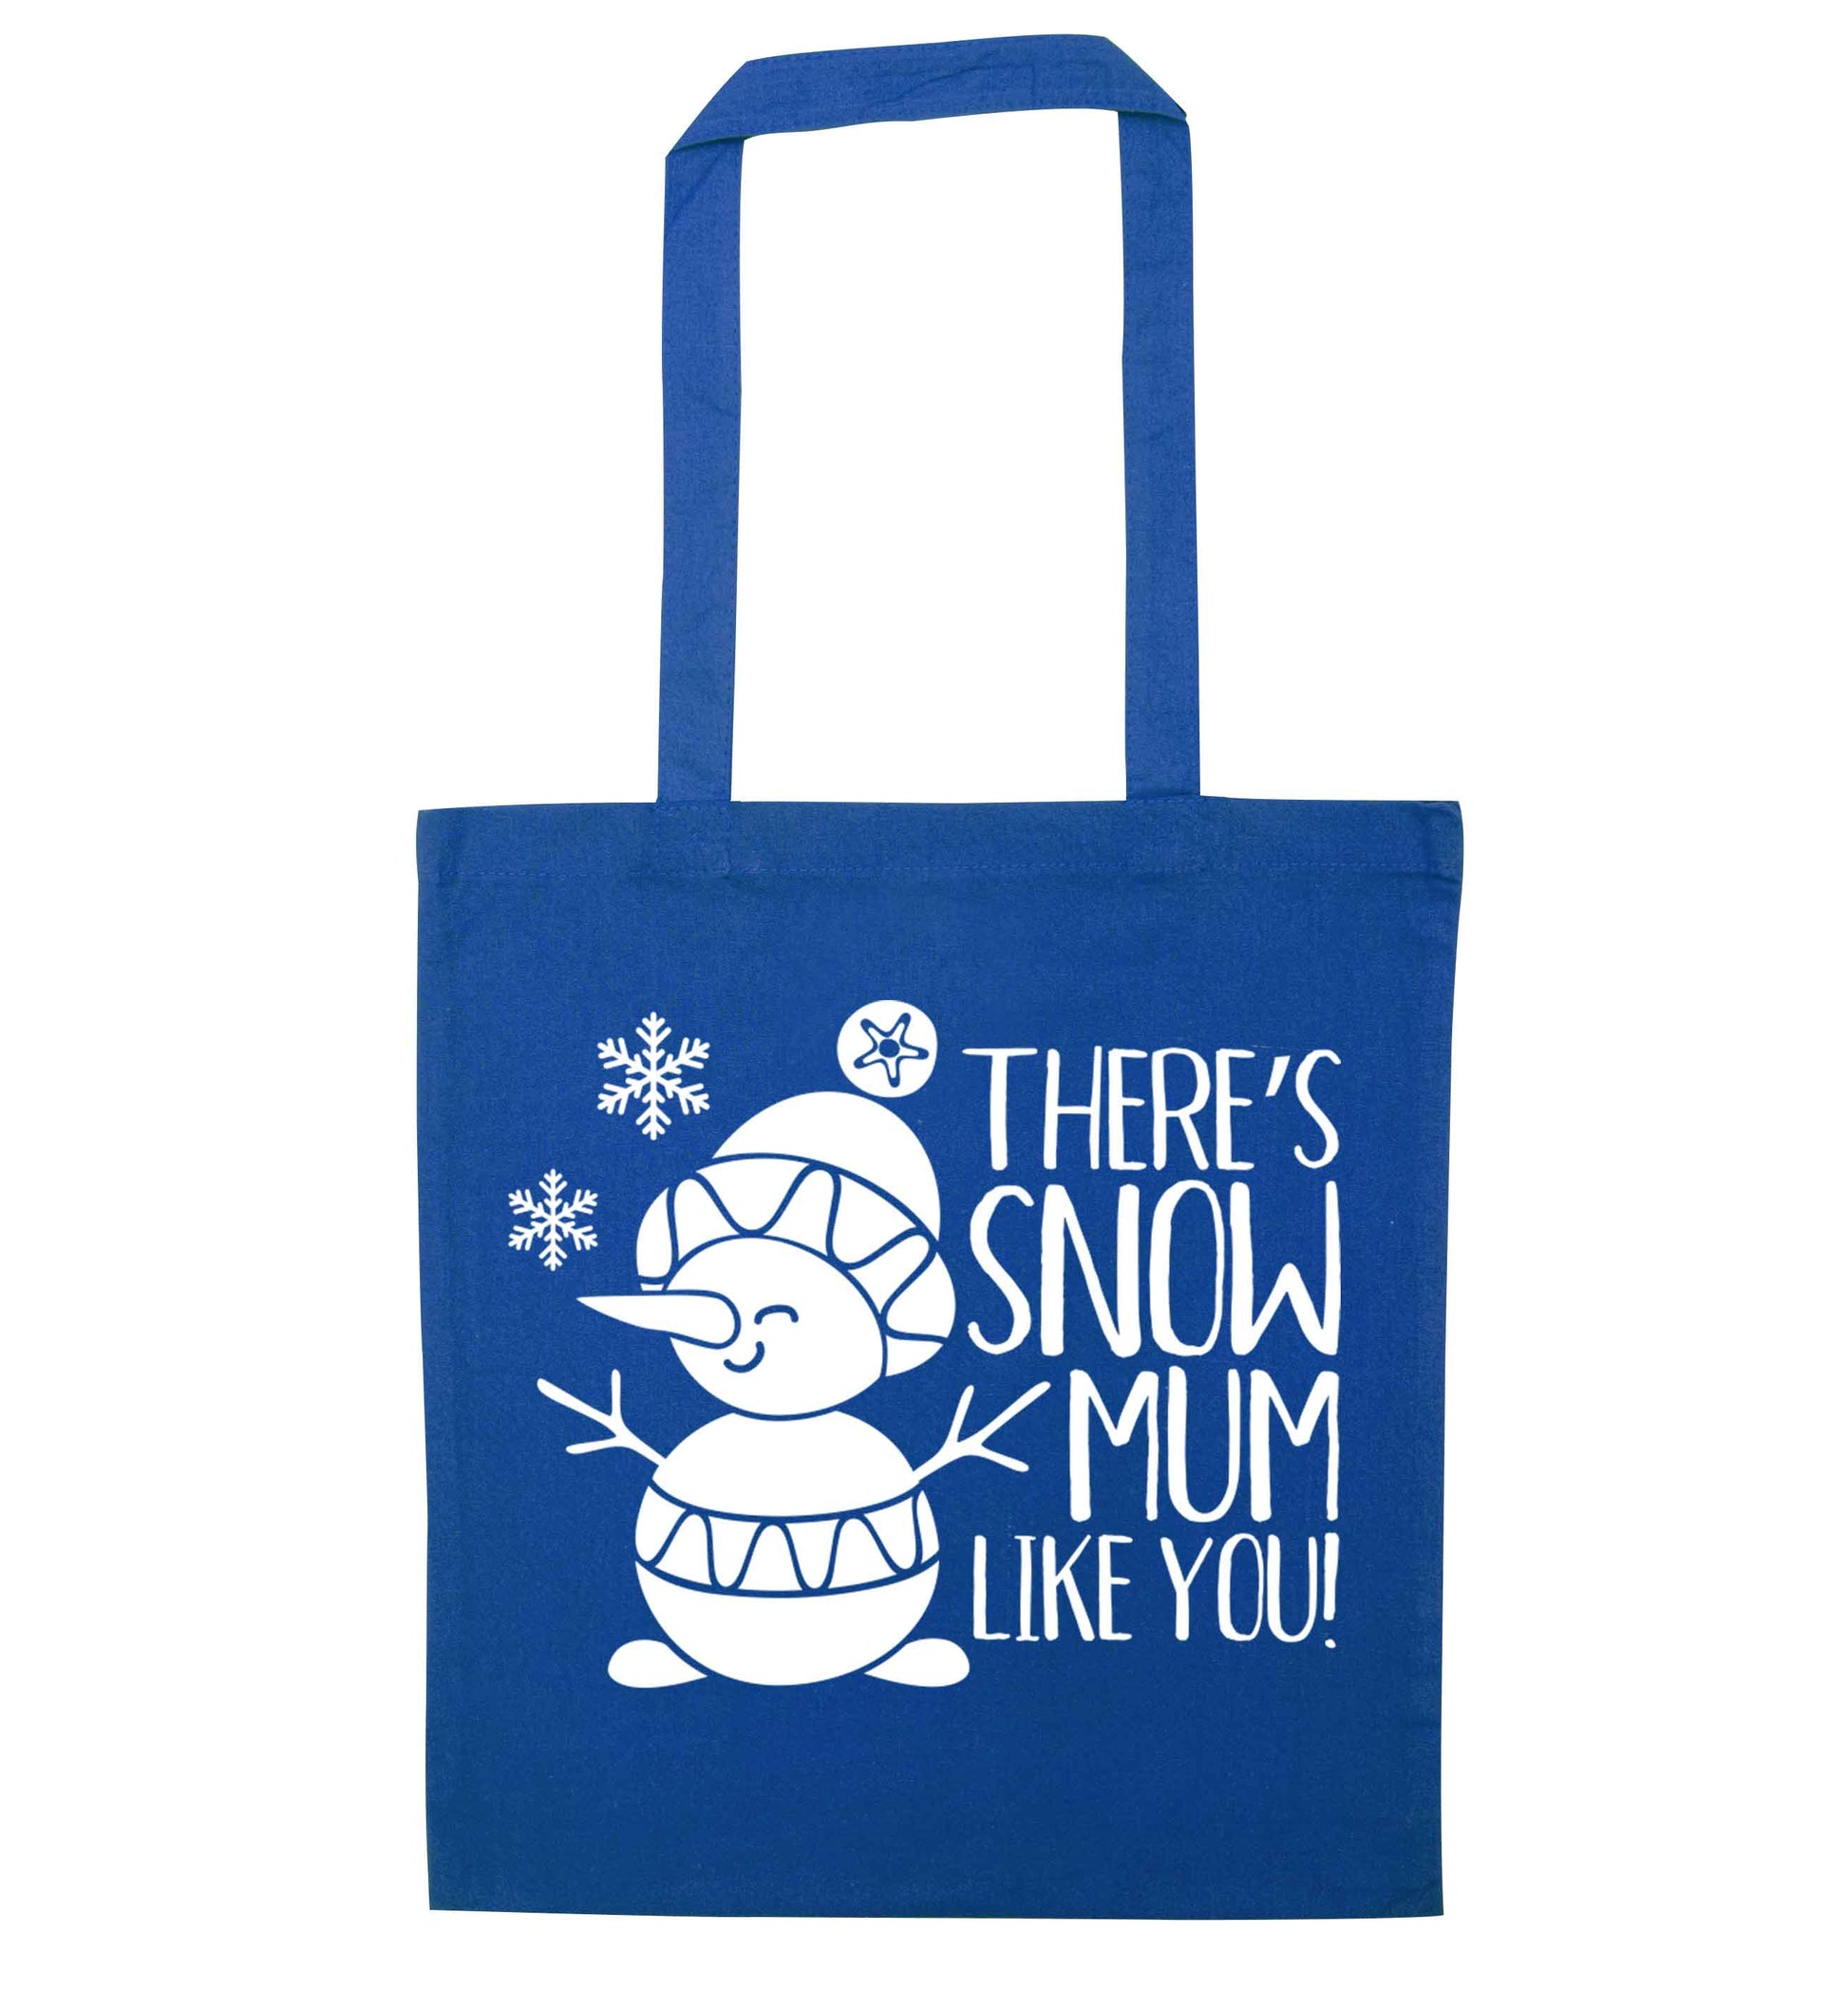 There's snow mum like you blue tote bag